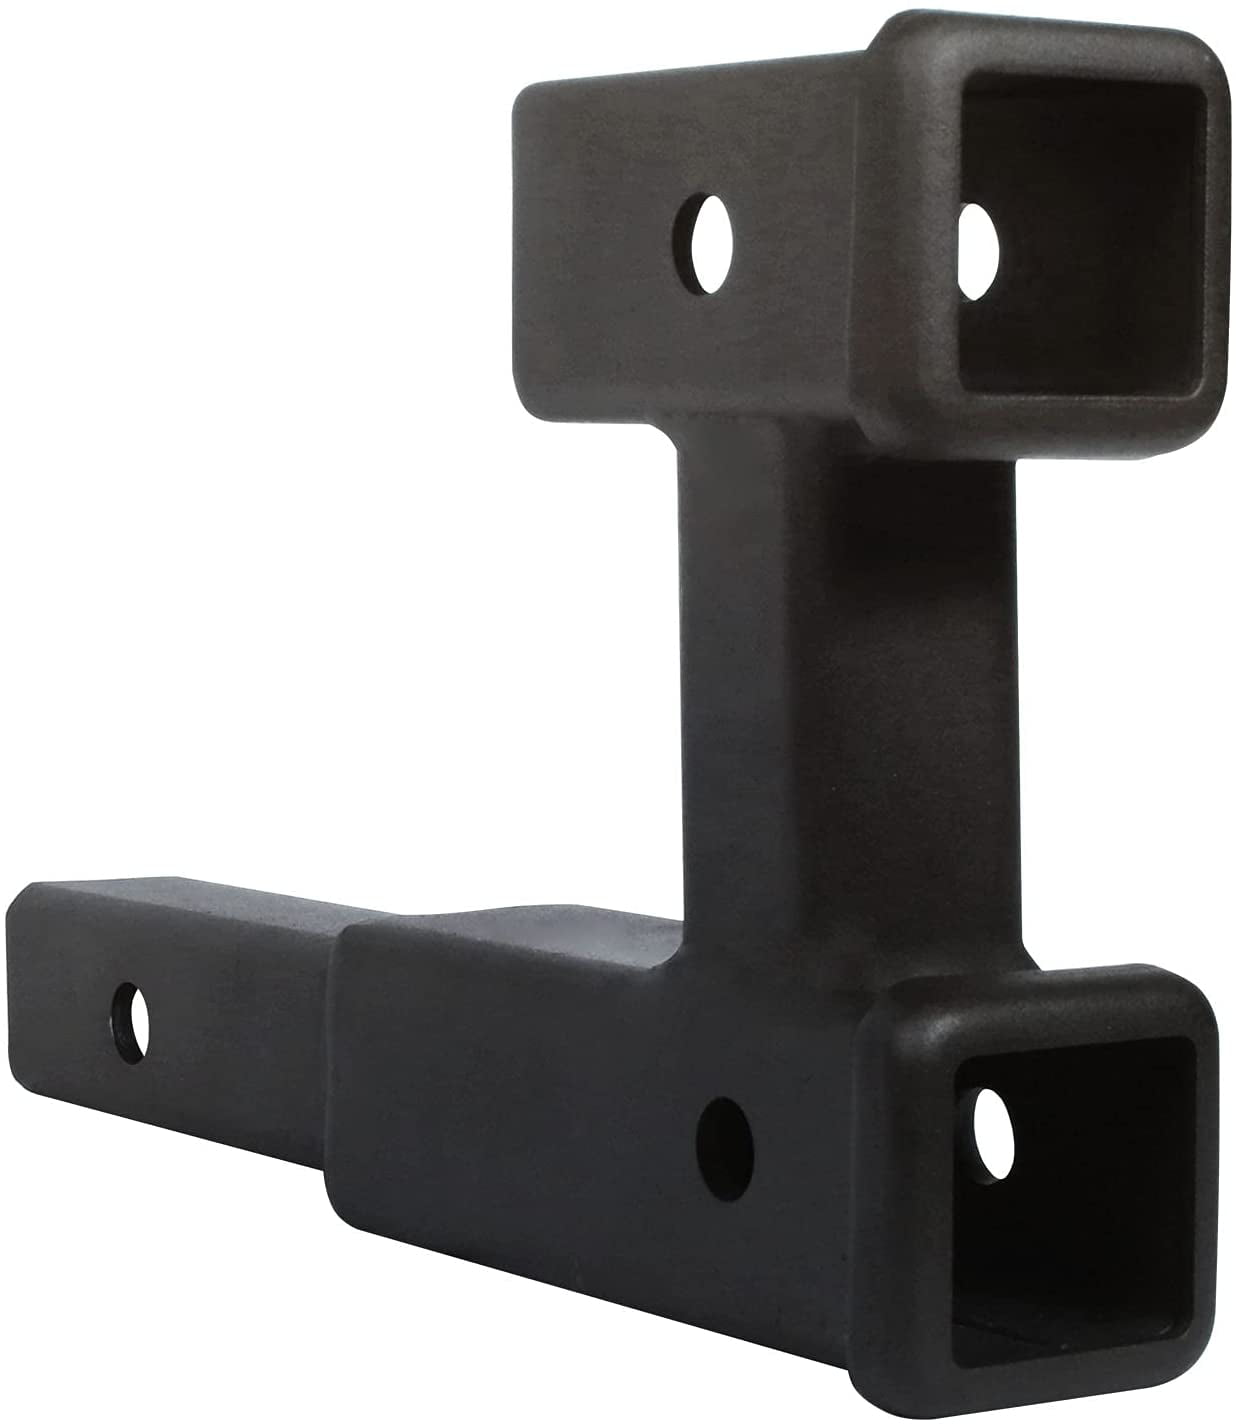 KAIRAY Double Hitch Receiver 2 inch Trailer Hitch Extension Riser Hitch Adapter Fits for 2 inch Receiver Extender to 10 inch Max Length 7.5 Inch Riser 